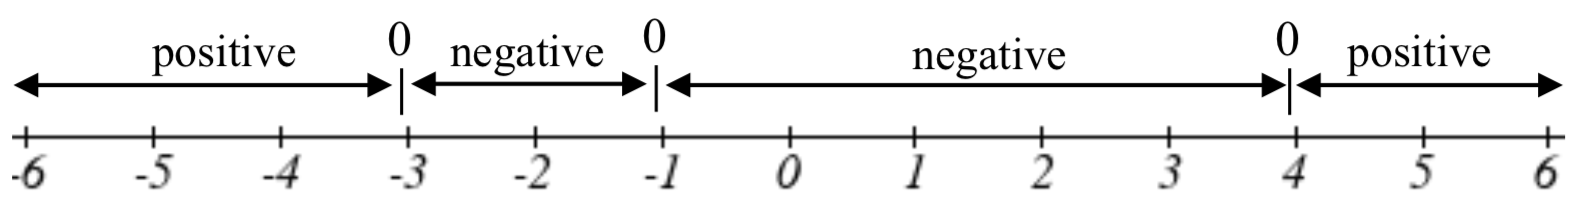 A numberline broken into 4 segments.  The segment to the left of -3 is labeled positive. The segment from -3 to -1 is labeled negative. The segment from -1 to 4 is labeled negative. The segment to the right of 4 is labeled positive.